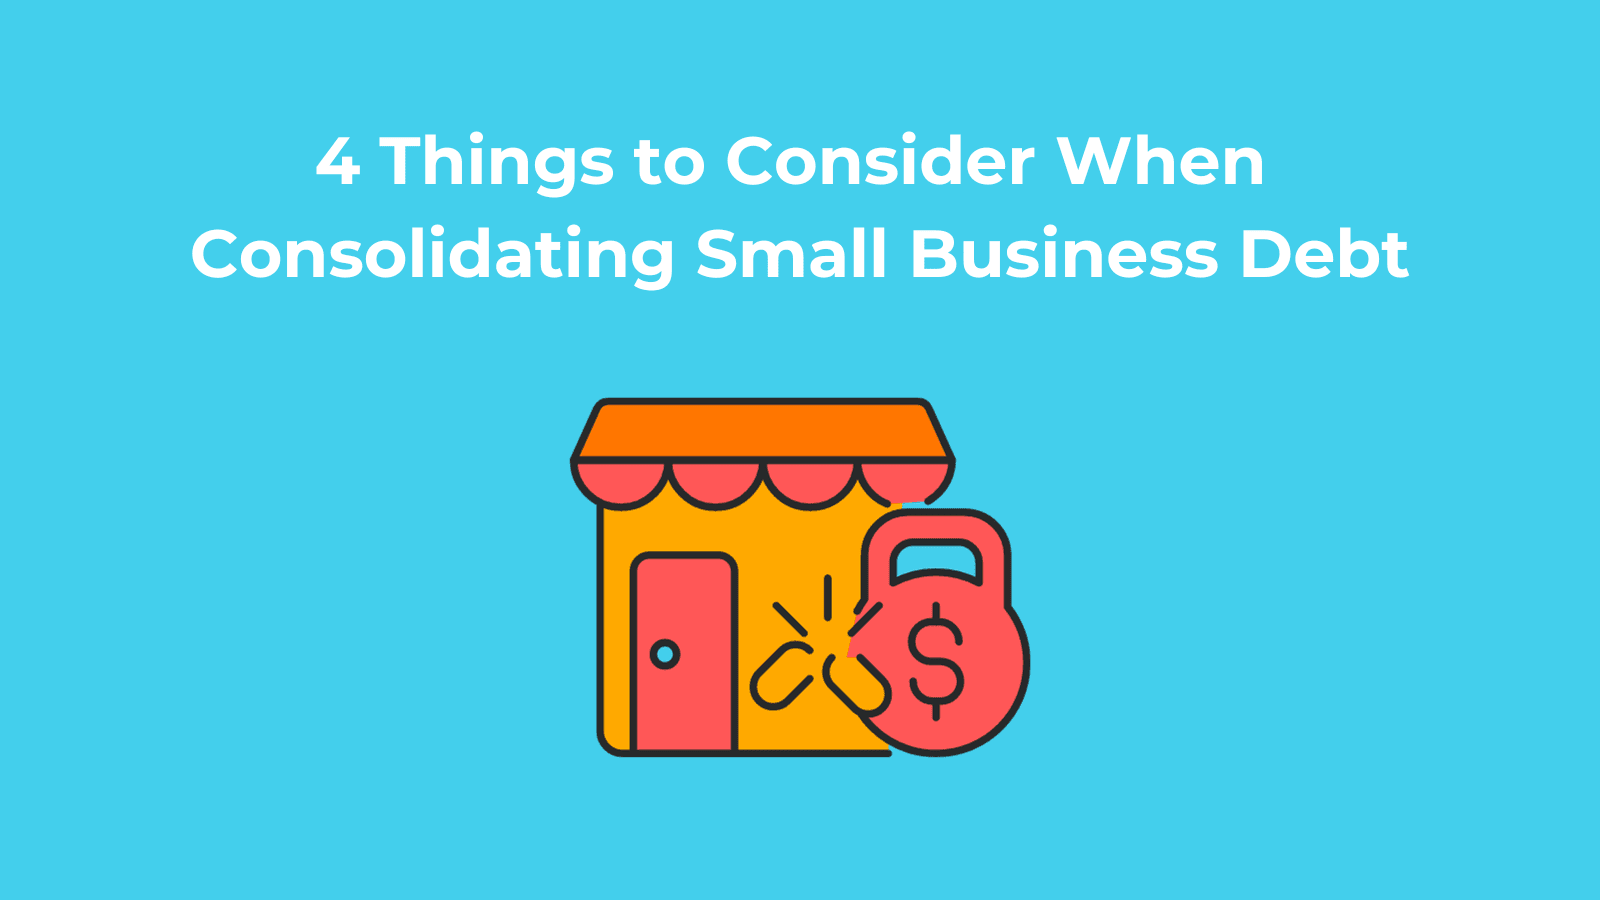 4 Things to Consider When Consolidating Small Business Debt